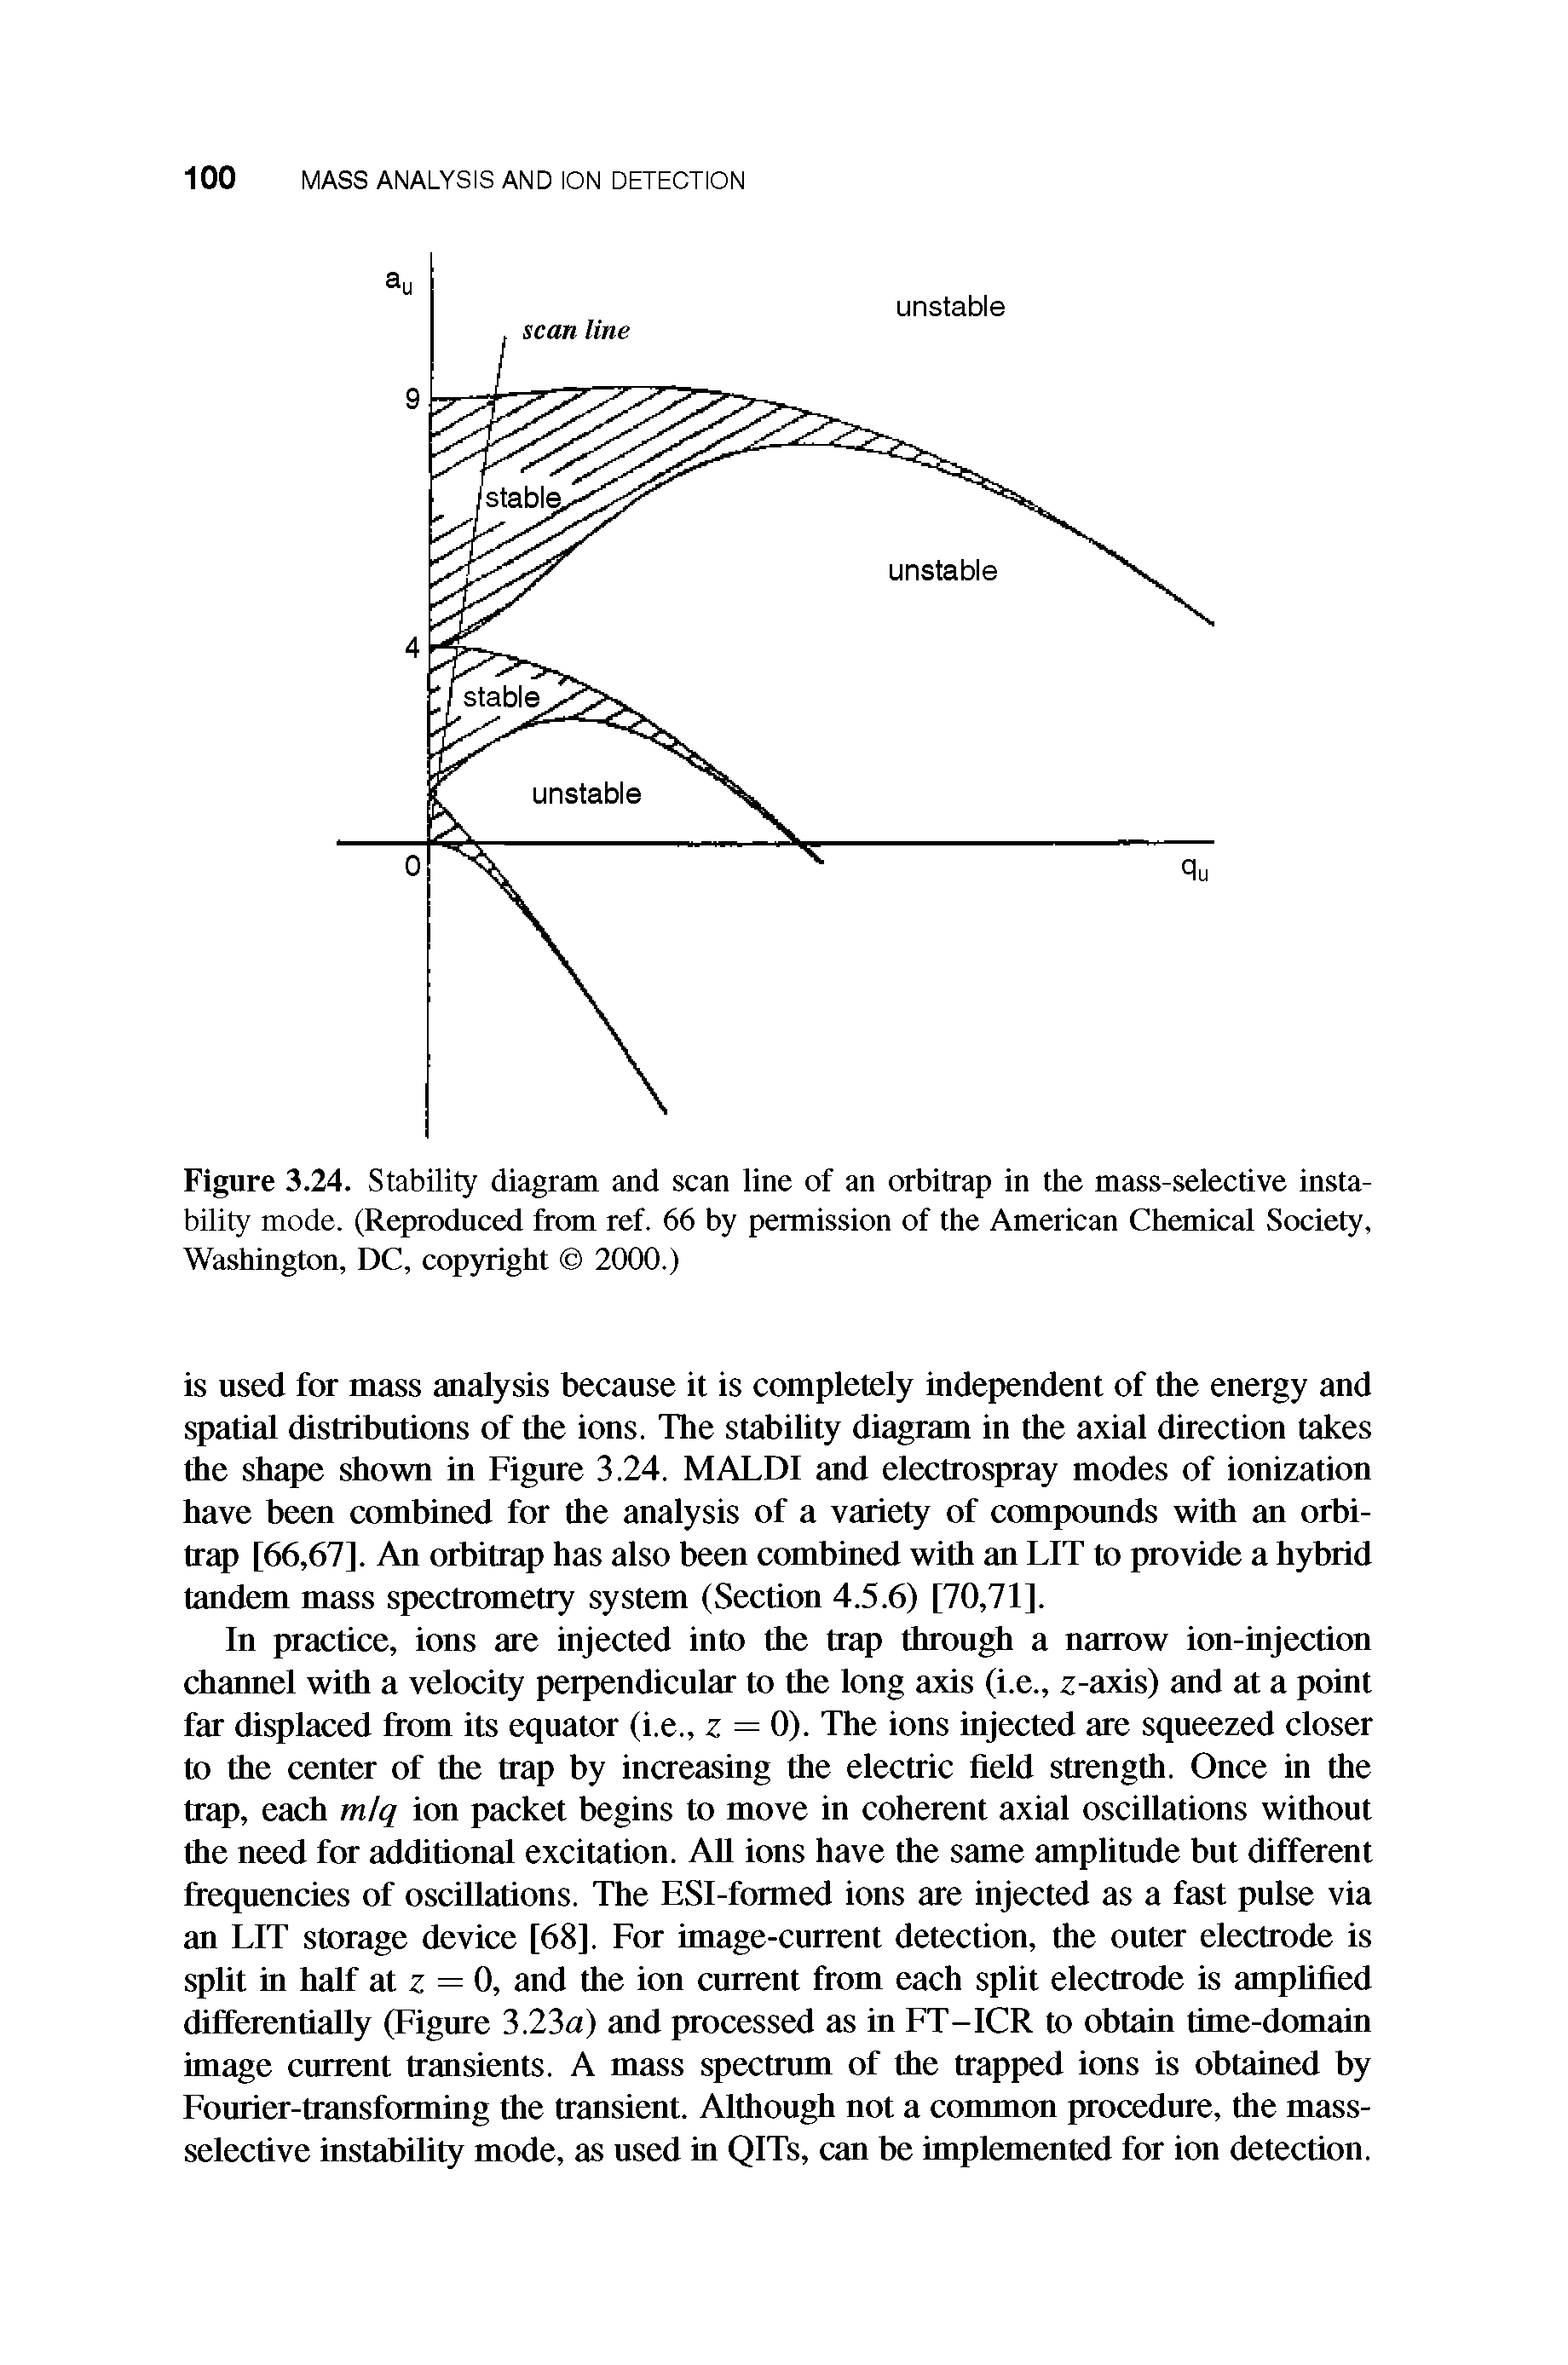 Figure 3.24. Stability diagram and scan line of an orbitrap in the mass-selective instability mode. (Reproduced from ref. 66 by permission of the American Chemical Society, Washington, DC, cop)night 2000.)...